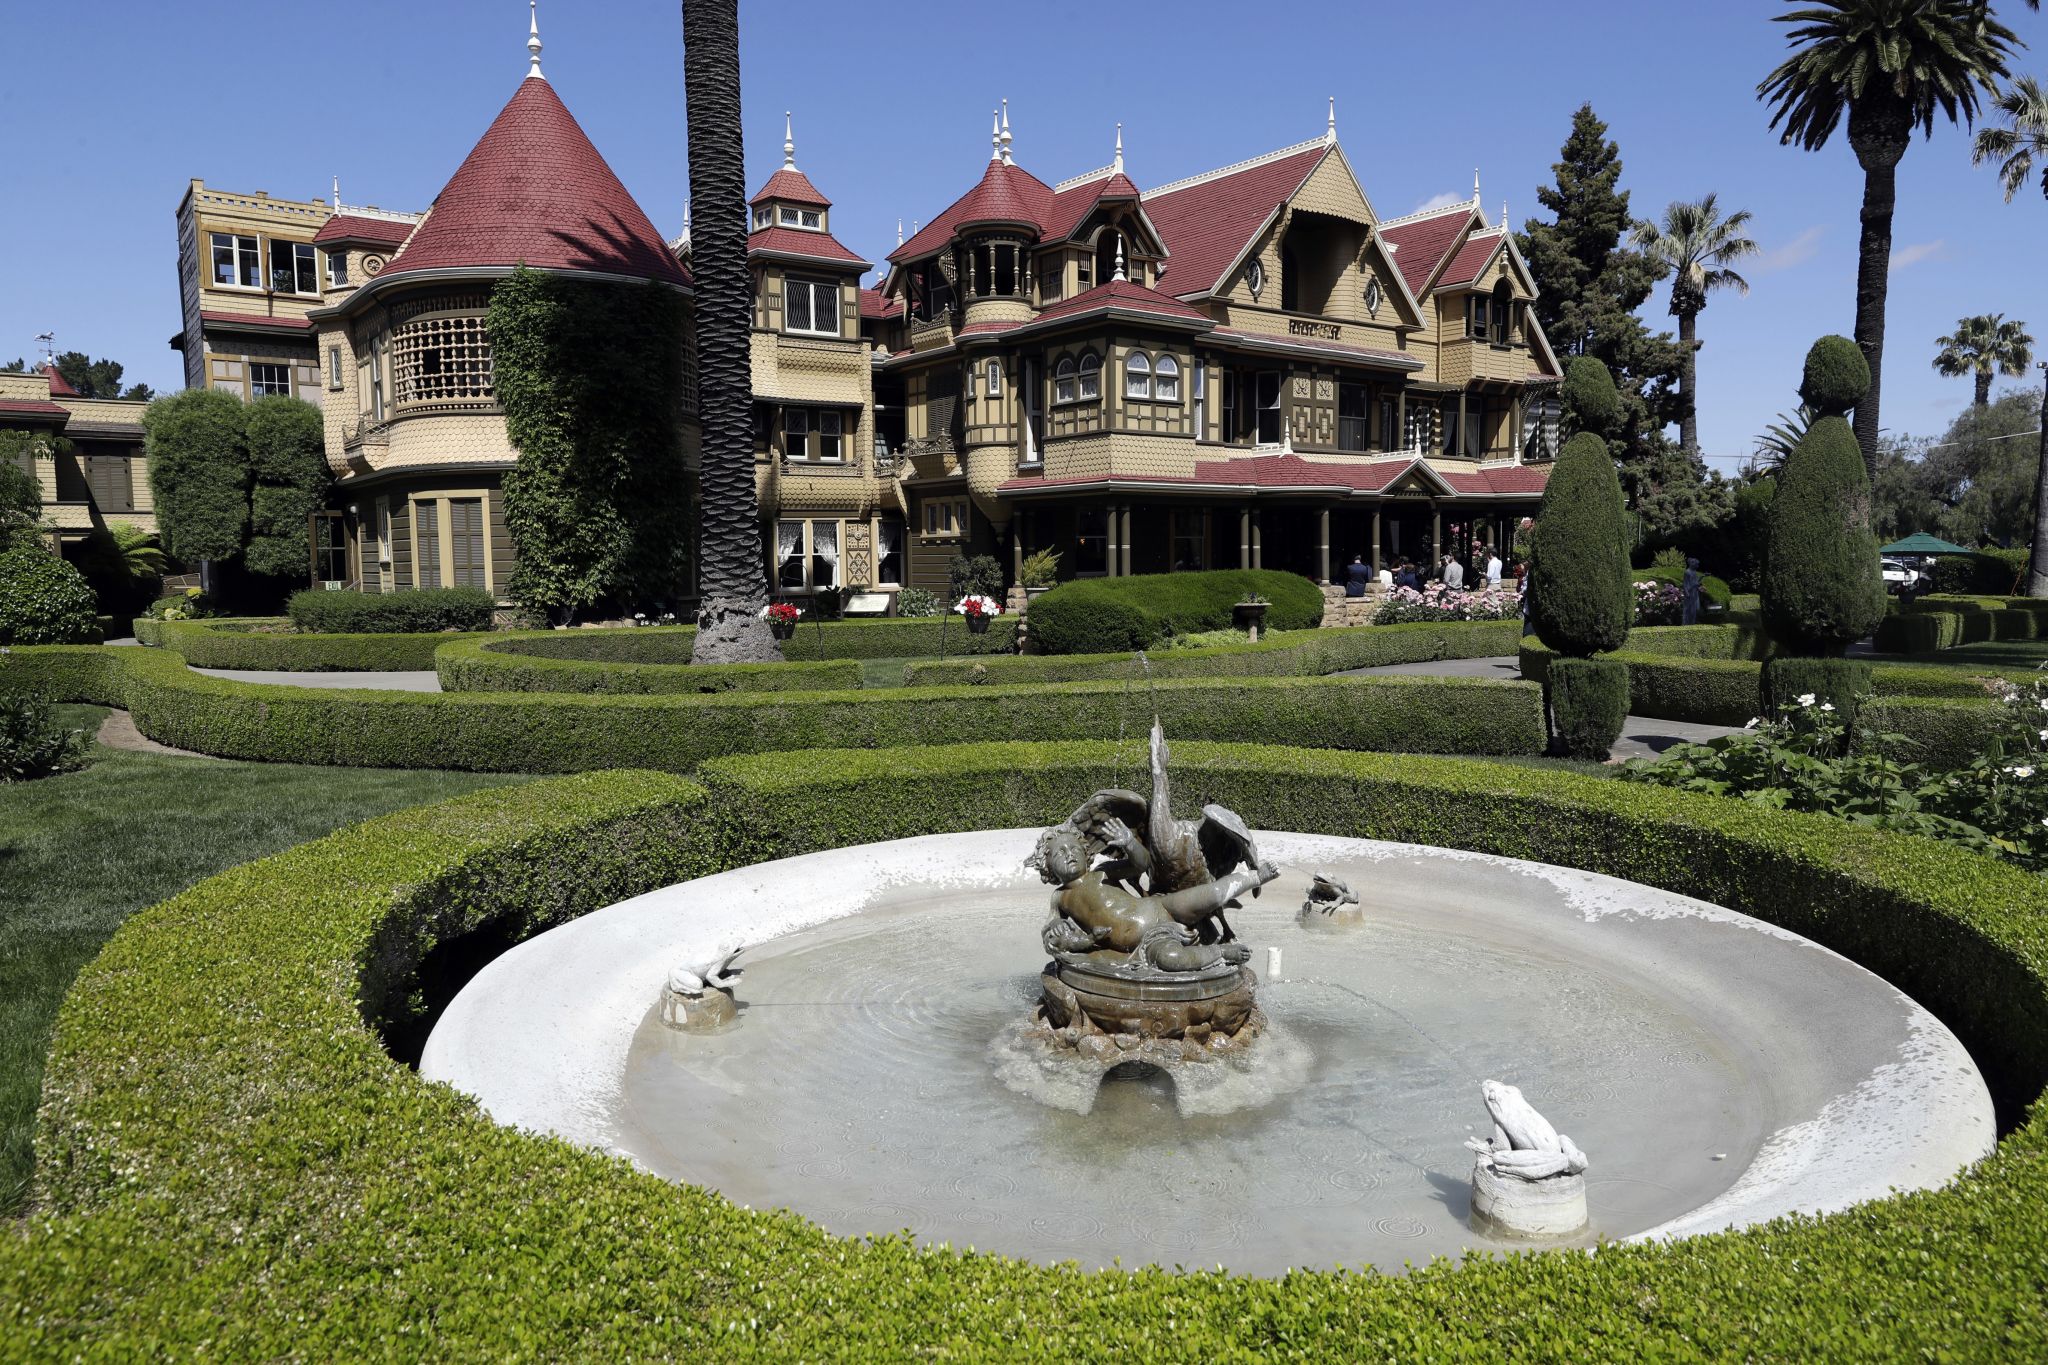 'San Jose has weird house': How the Winchester Mystery House was reported on in the ...